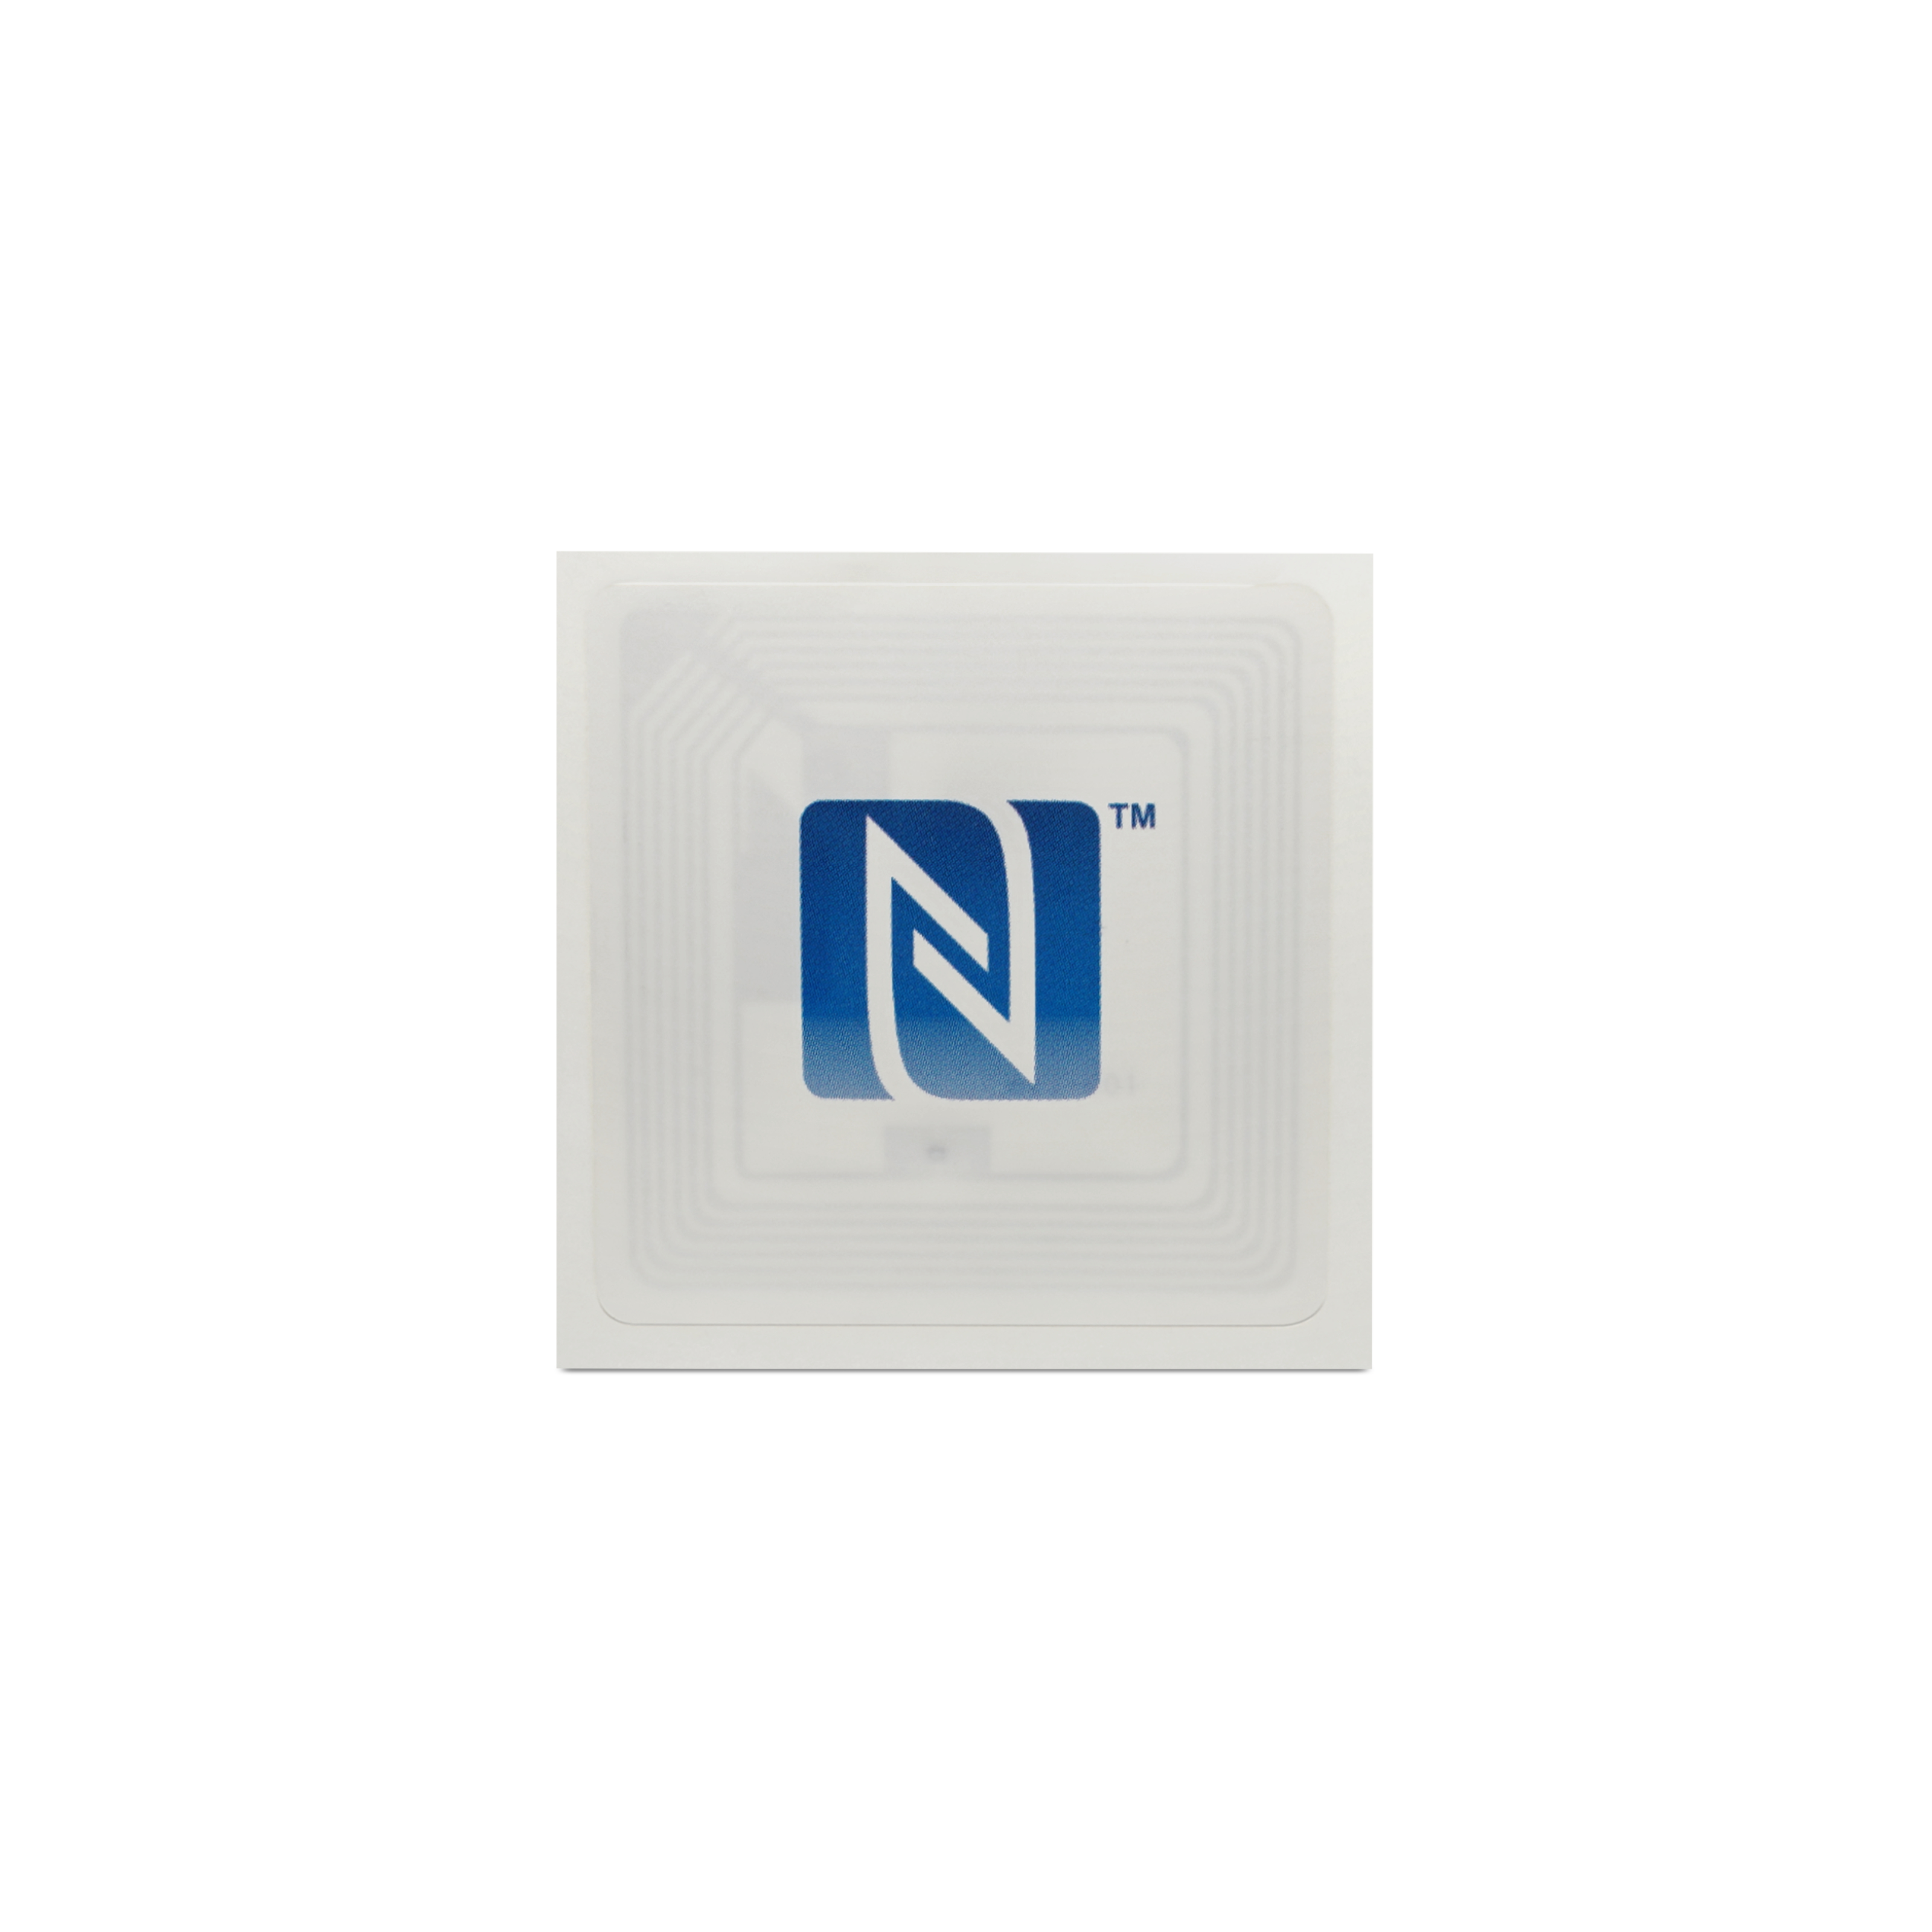 NFC Sticker PET - 35 x 35 mm - NTAG213 - 180 Byte - square - white with logo